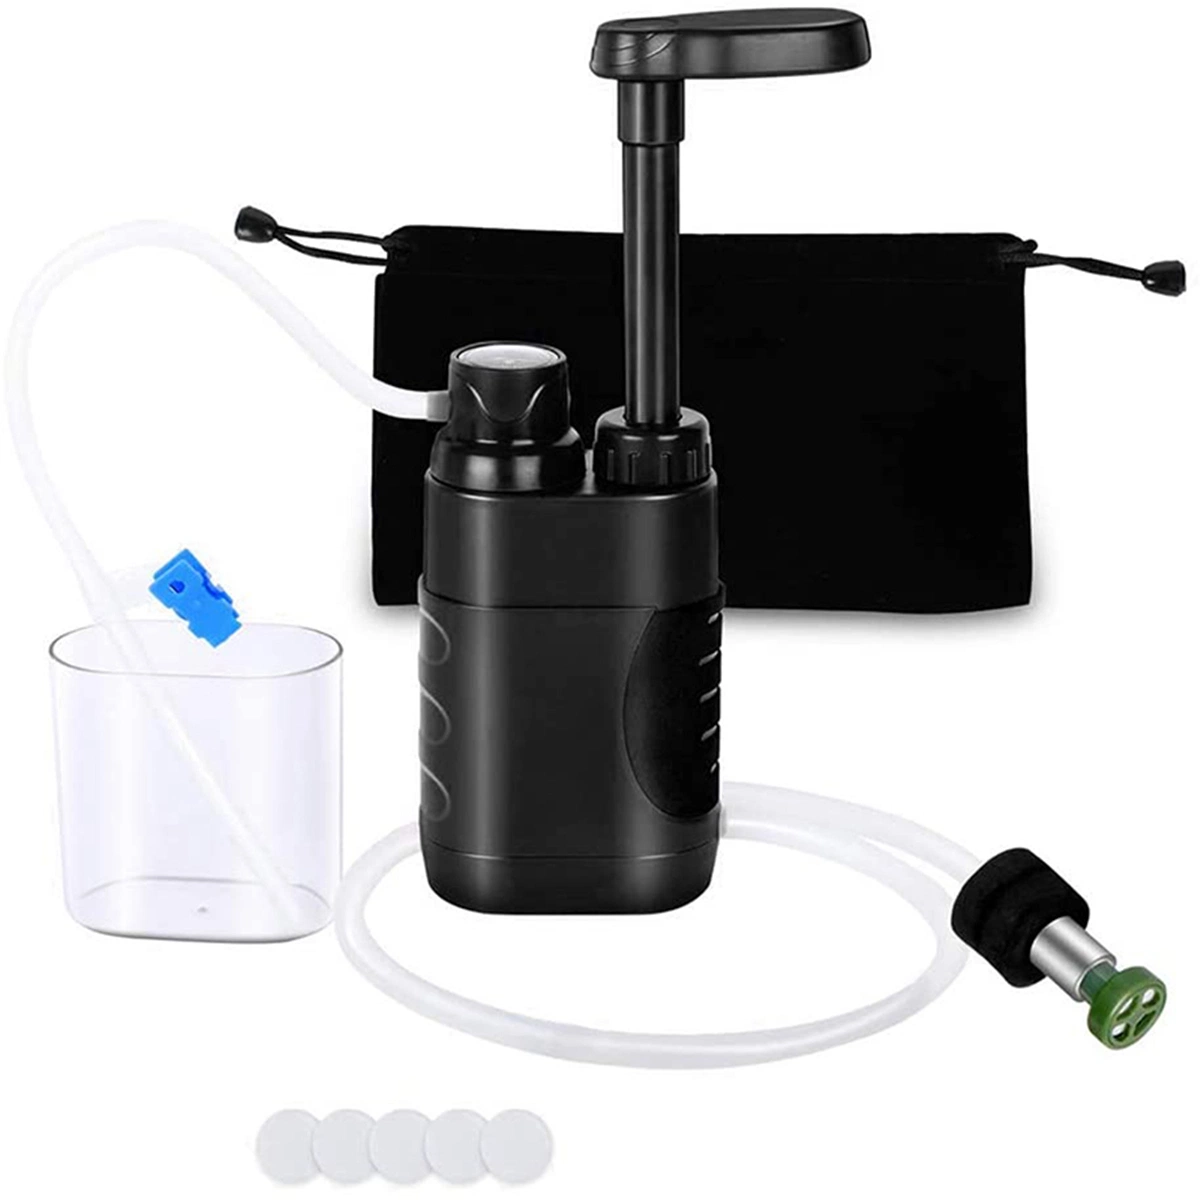 Outdoor Water Filter Straw Portable Emergency Filtering Water Filtration System Wbb15337